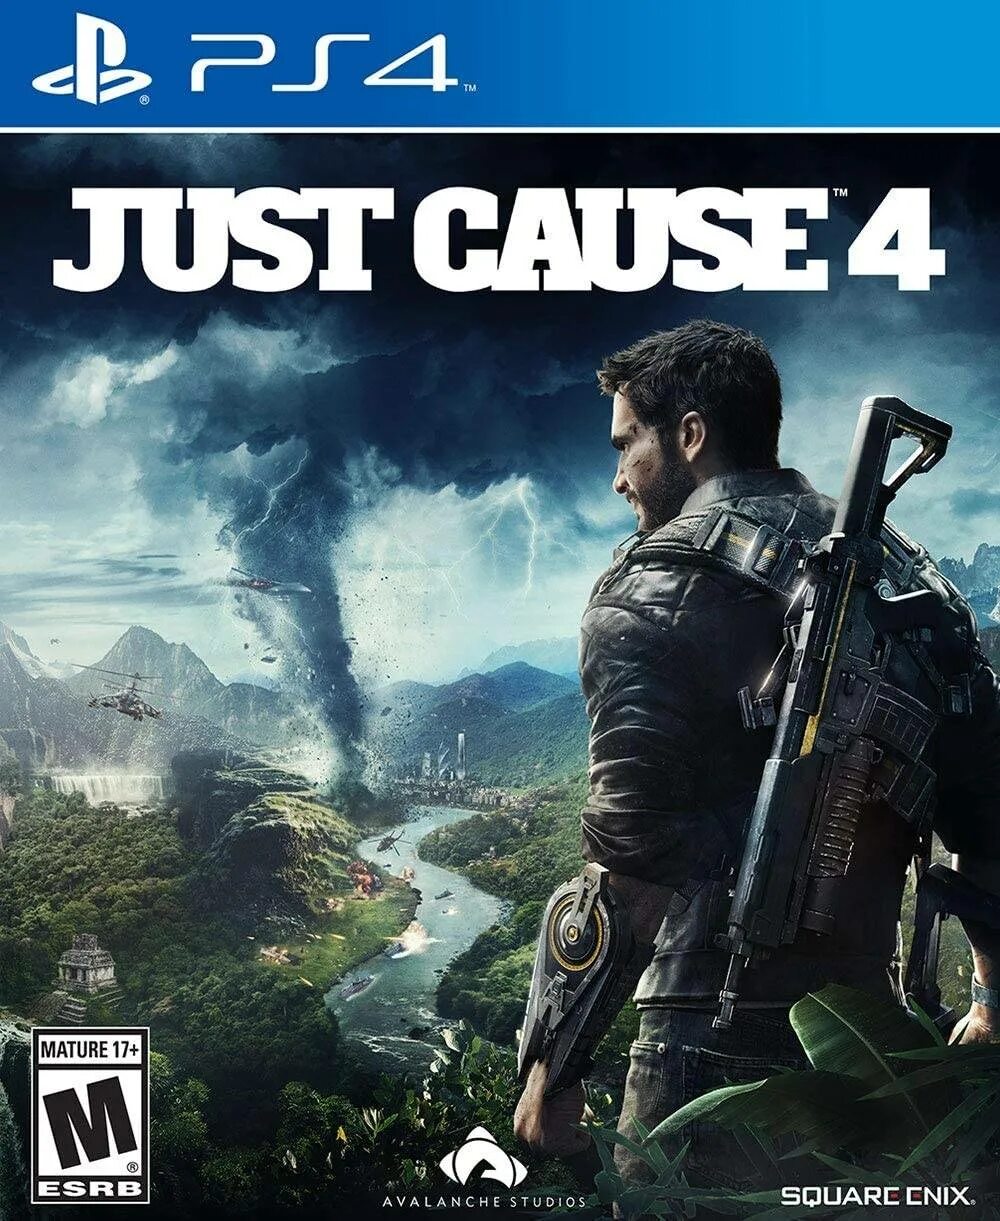 Игры ps4 издание. Just cause 4 [ps4]. Just cause 4 ps4 диск. Just cause 4 ps4 обложка. Just cause 4 ps4 Cover.